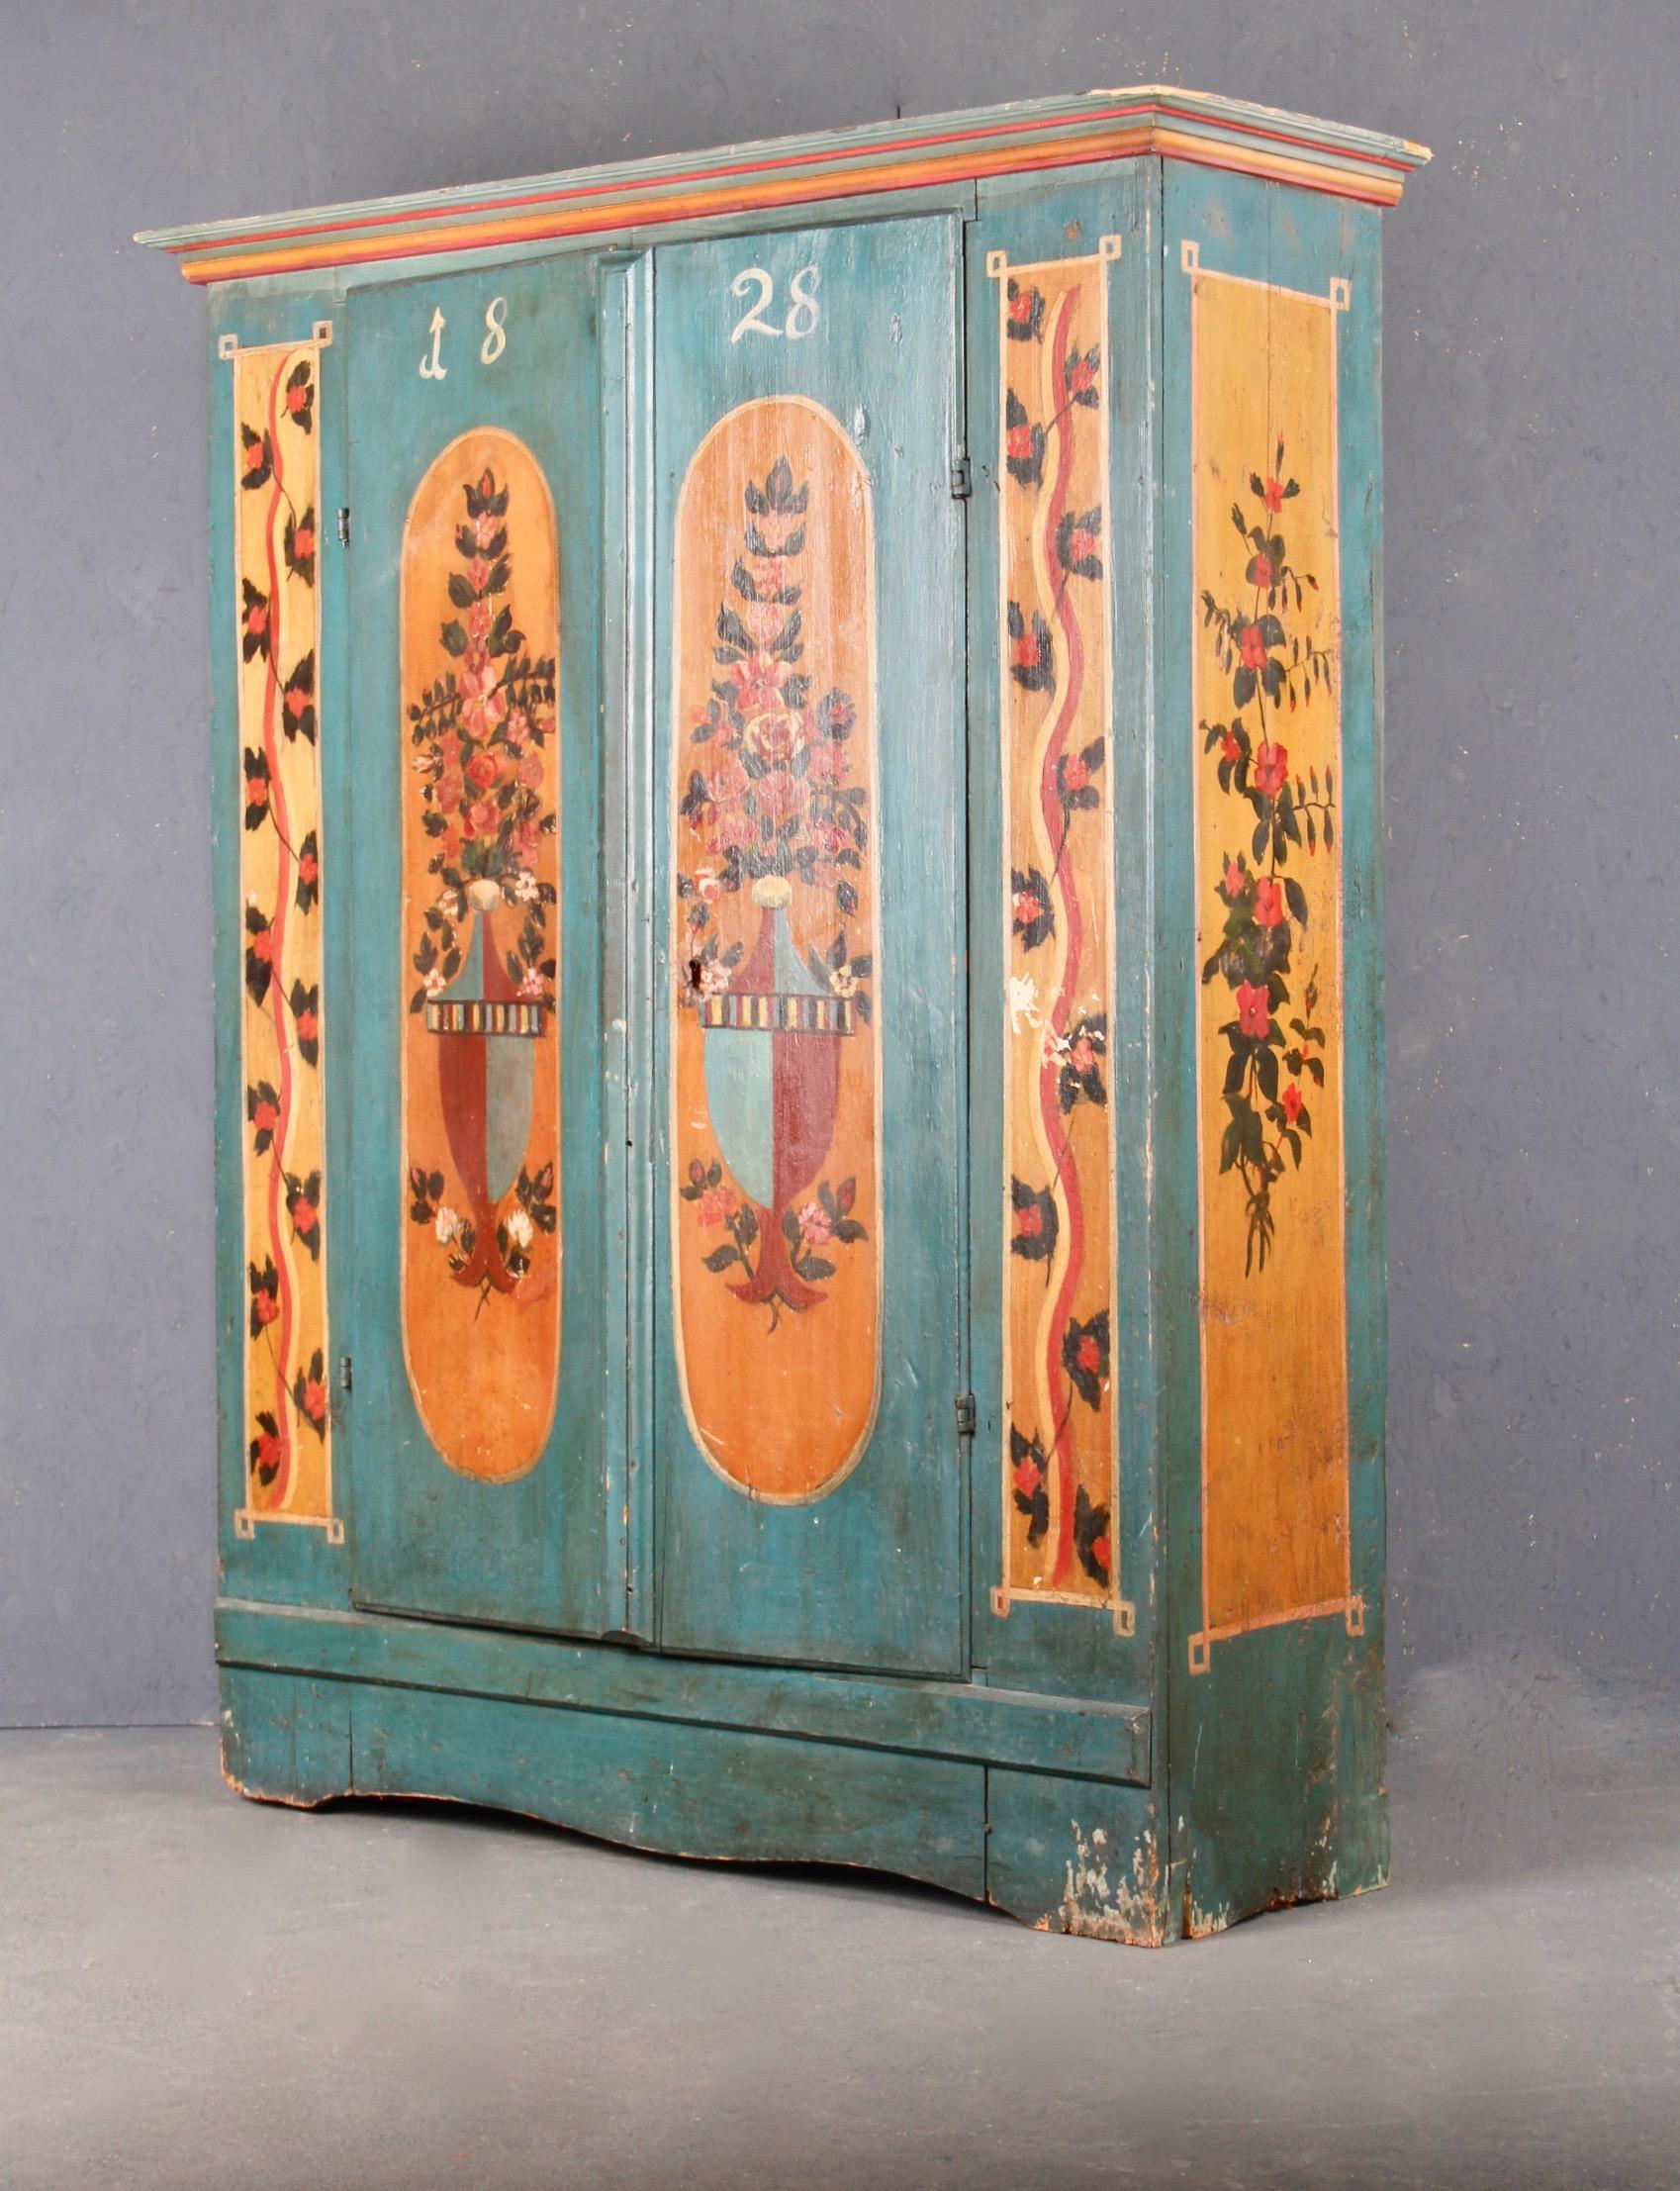 Swiss alp painted cupboard dated 1828 